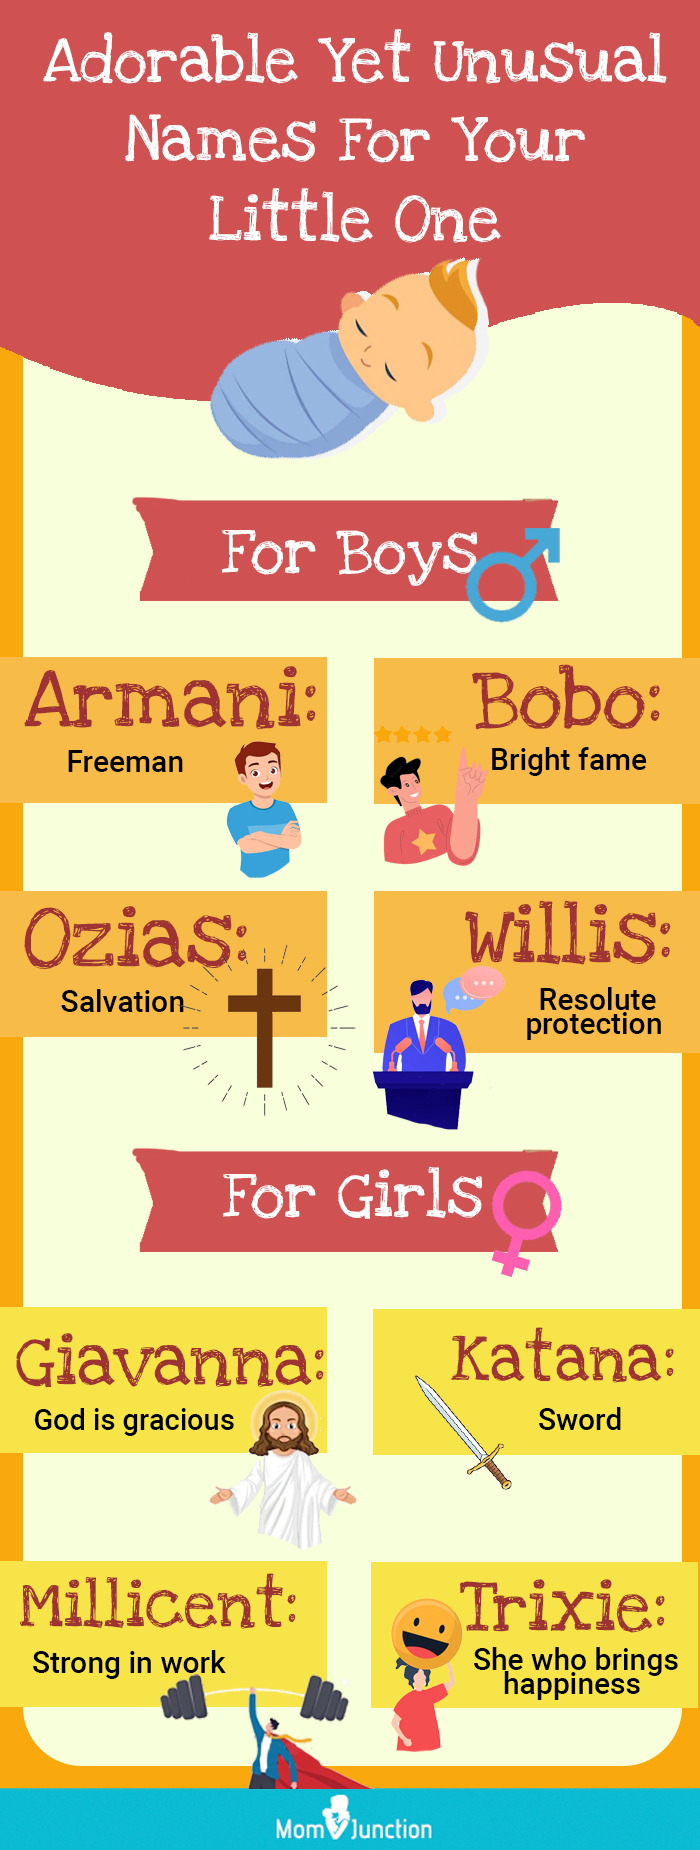 adorable yet unusual names for your little one (infographic)